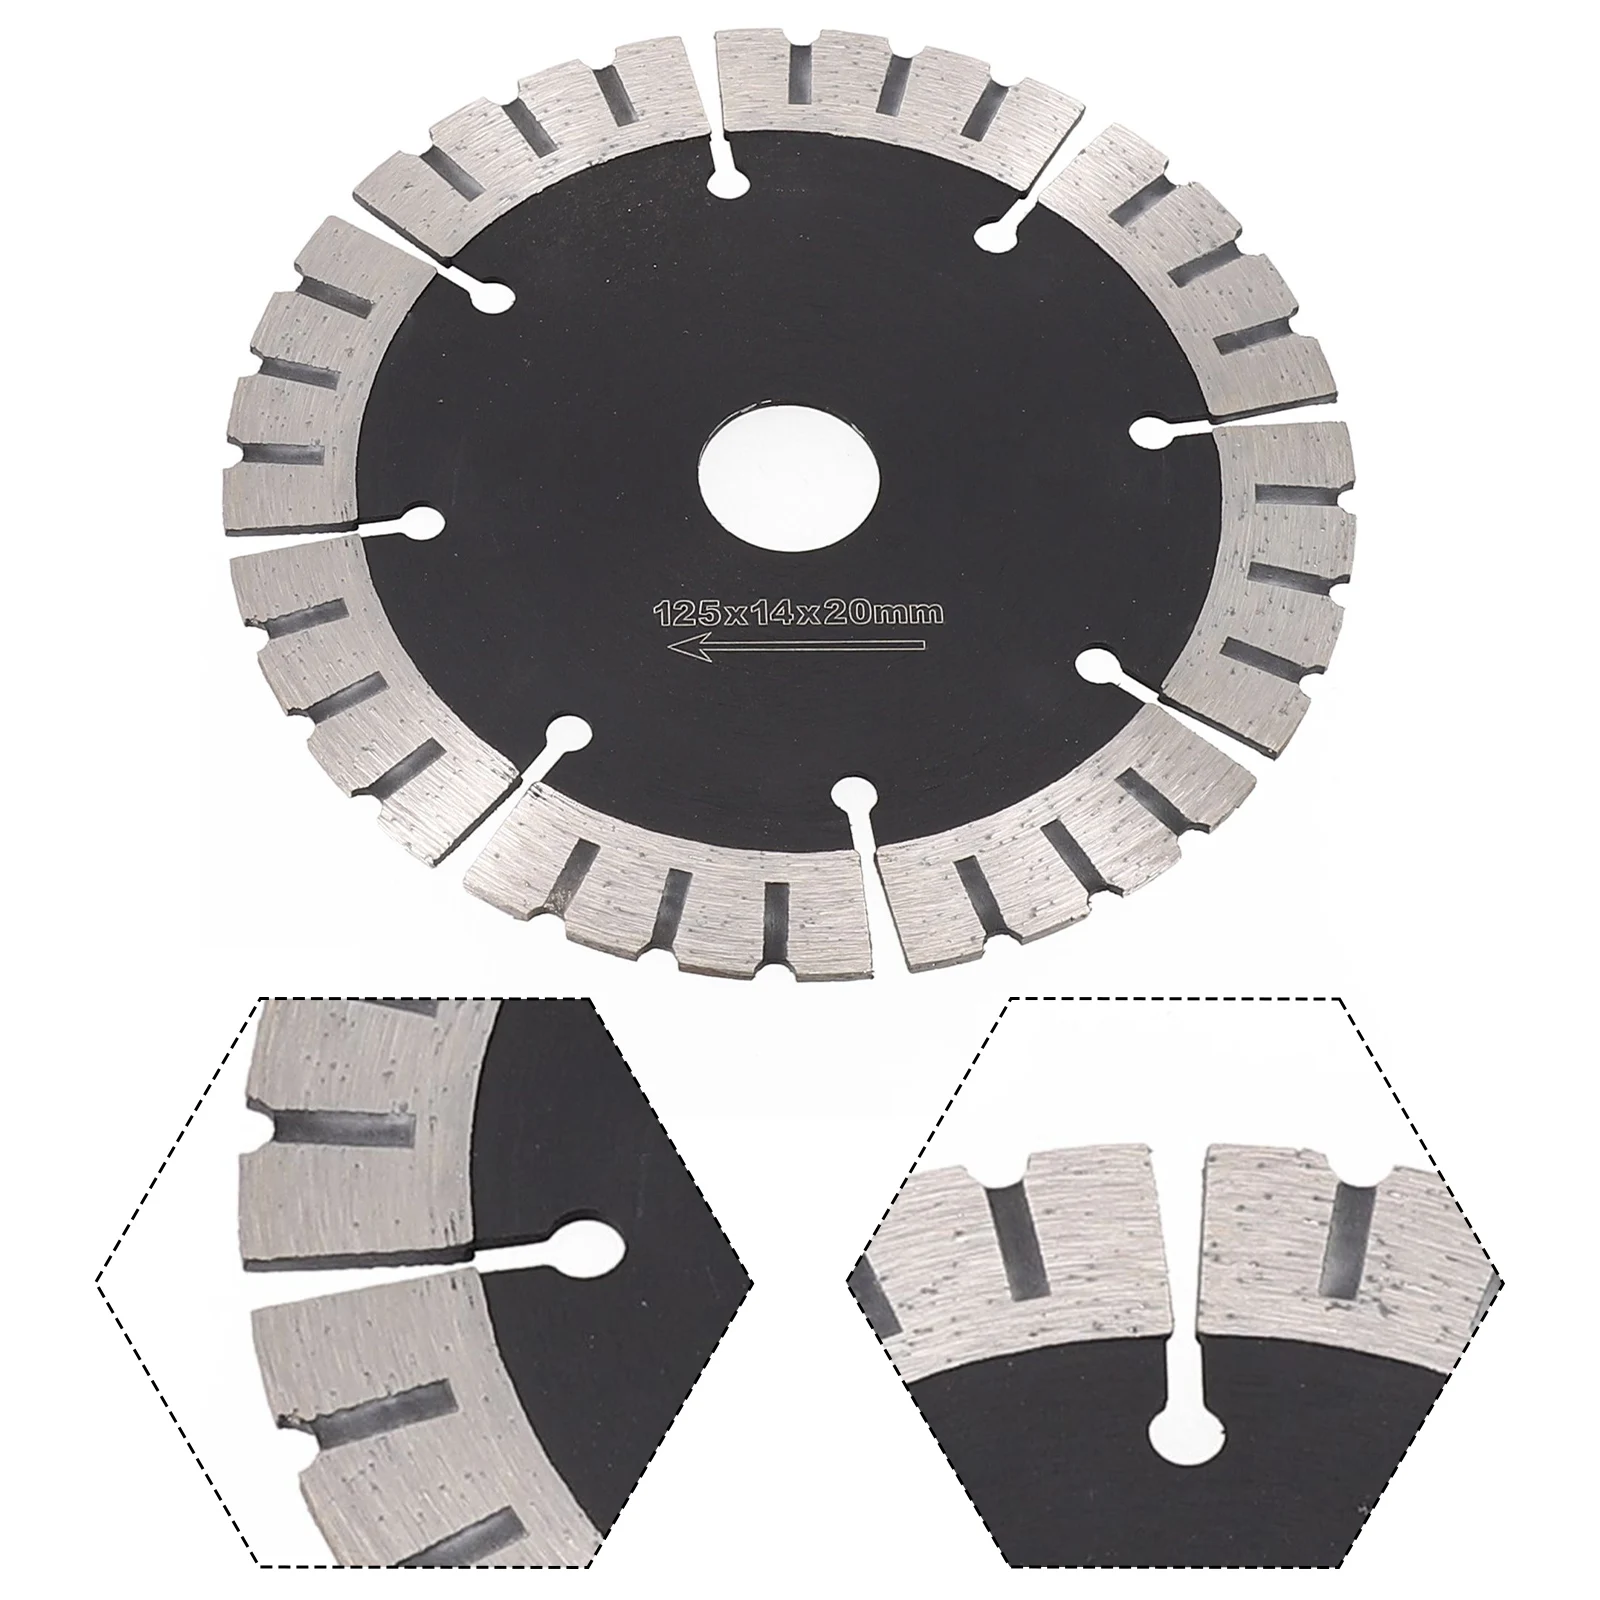 Cutting Tools Diamond Saw Blade Cutting Disc 1Pc 5inch Diameter 125mm Replacement Segment Saw Blade High Qulity small axial fan aluminum high temperature cooling fan blade metal vane small diy tools 70mm diameter 6mm shaft